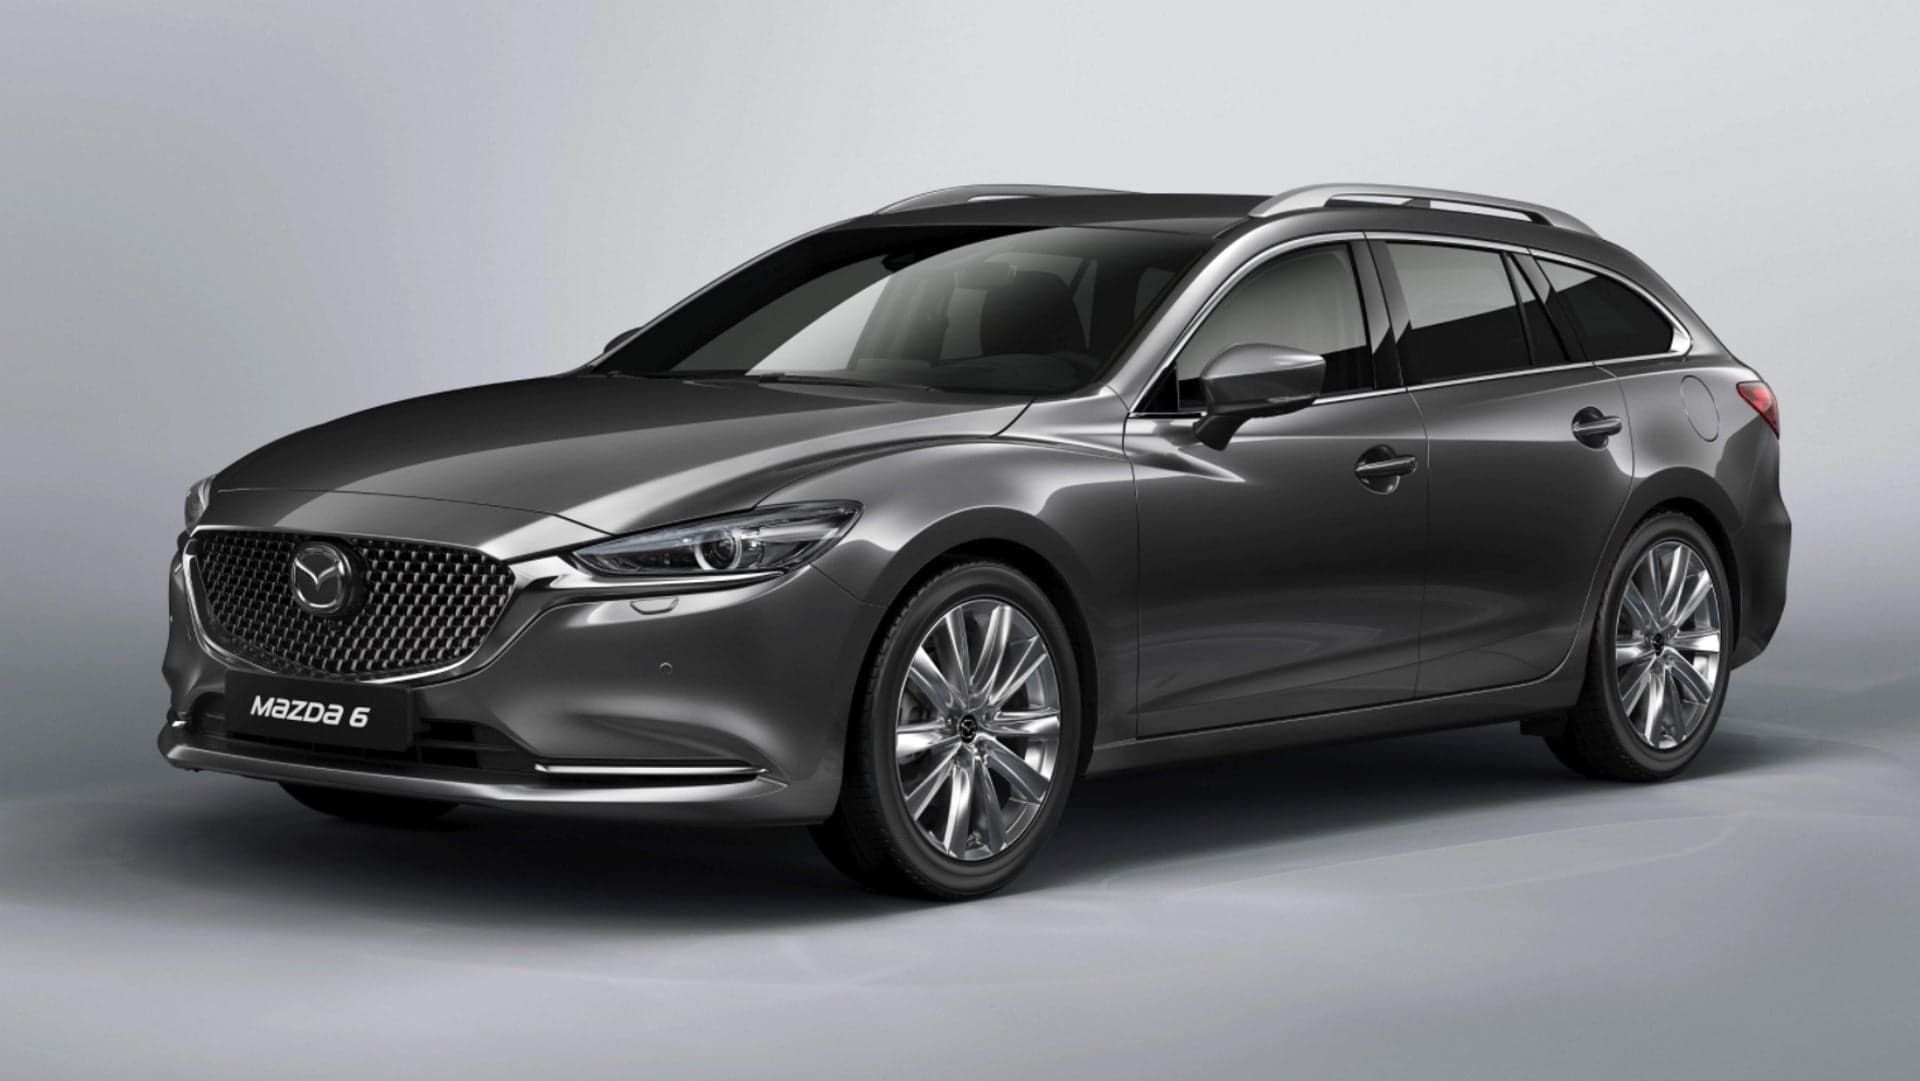 Here’s the 2018 Mazda6 Wagon We Probably Won’t Get in the U.S.